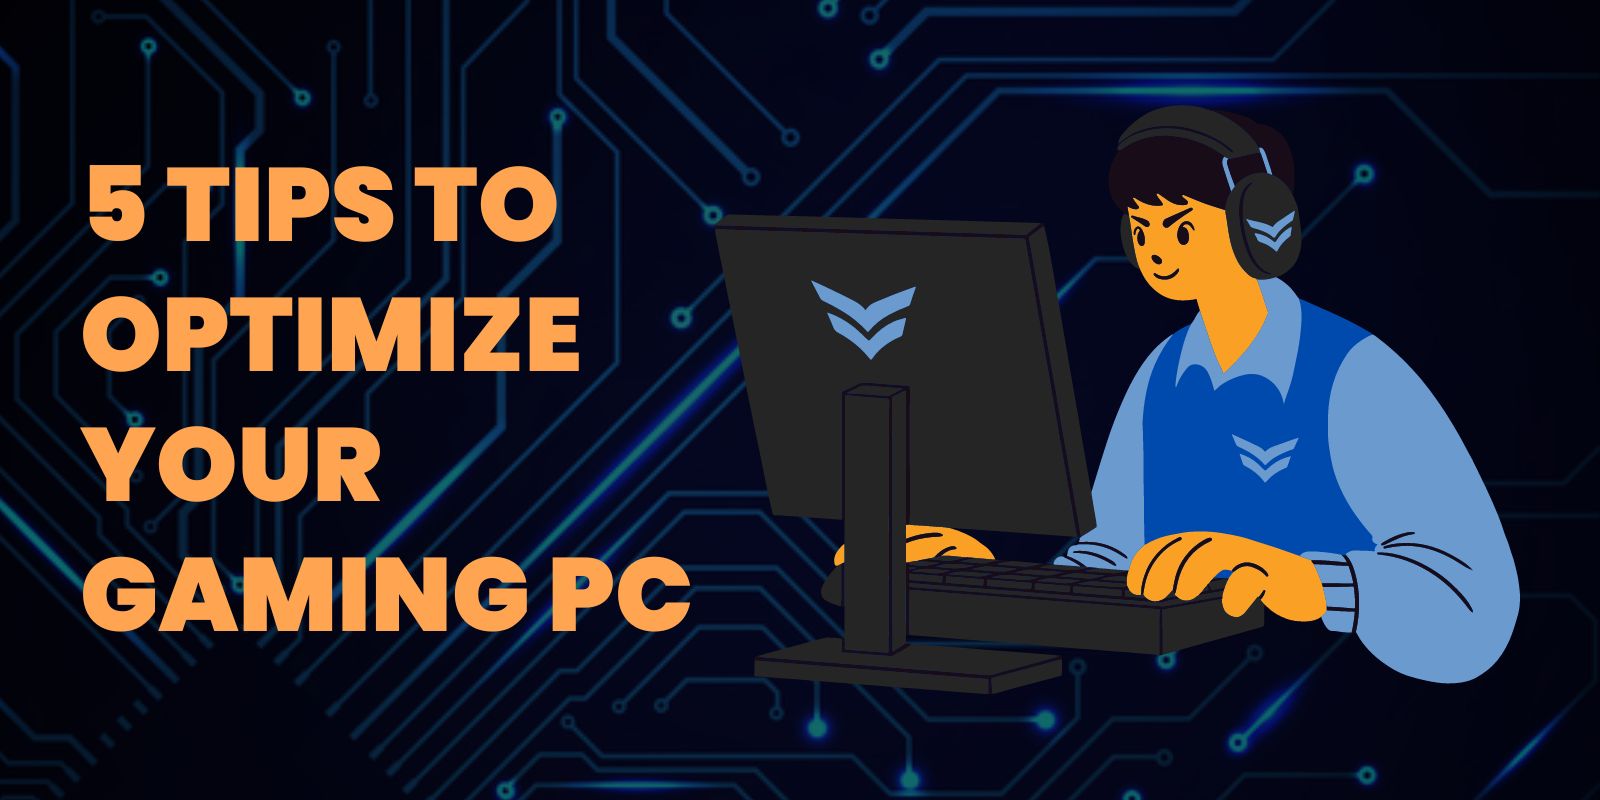 5 Tips to Optimize Your Gaming PC